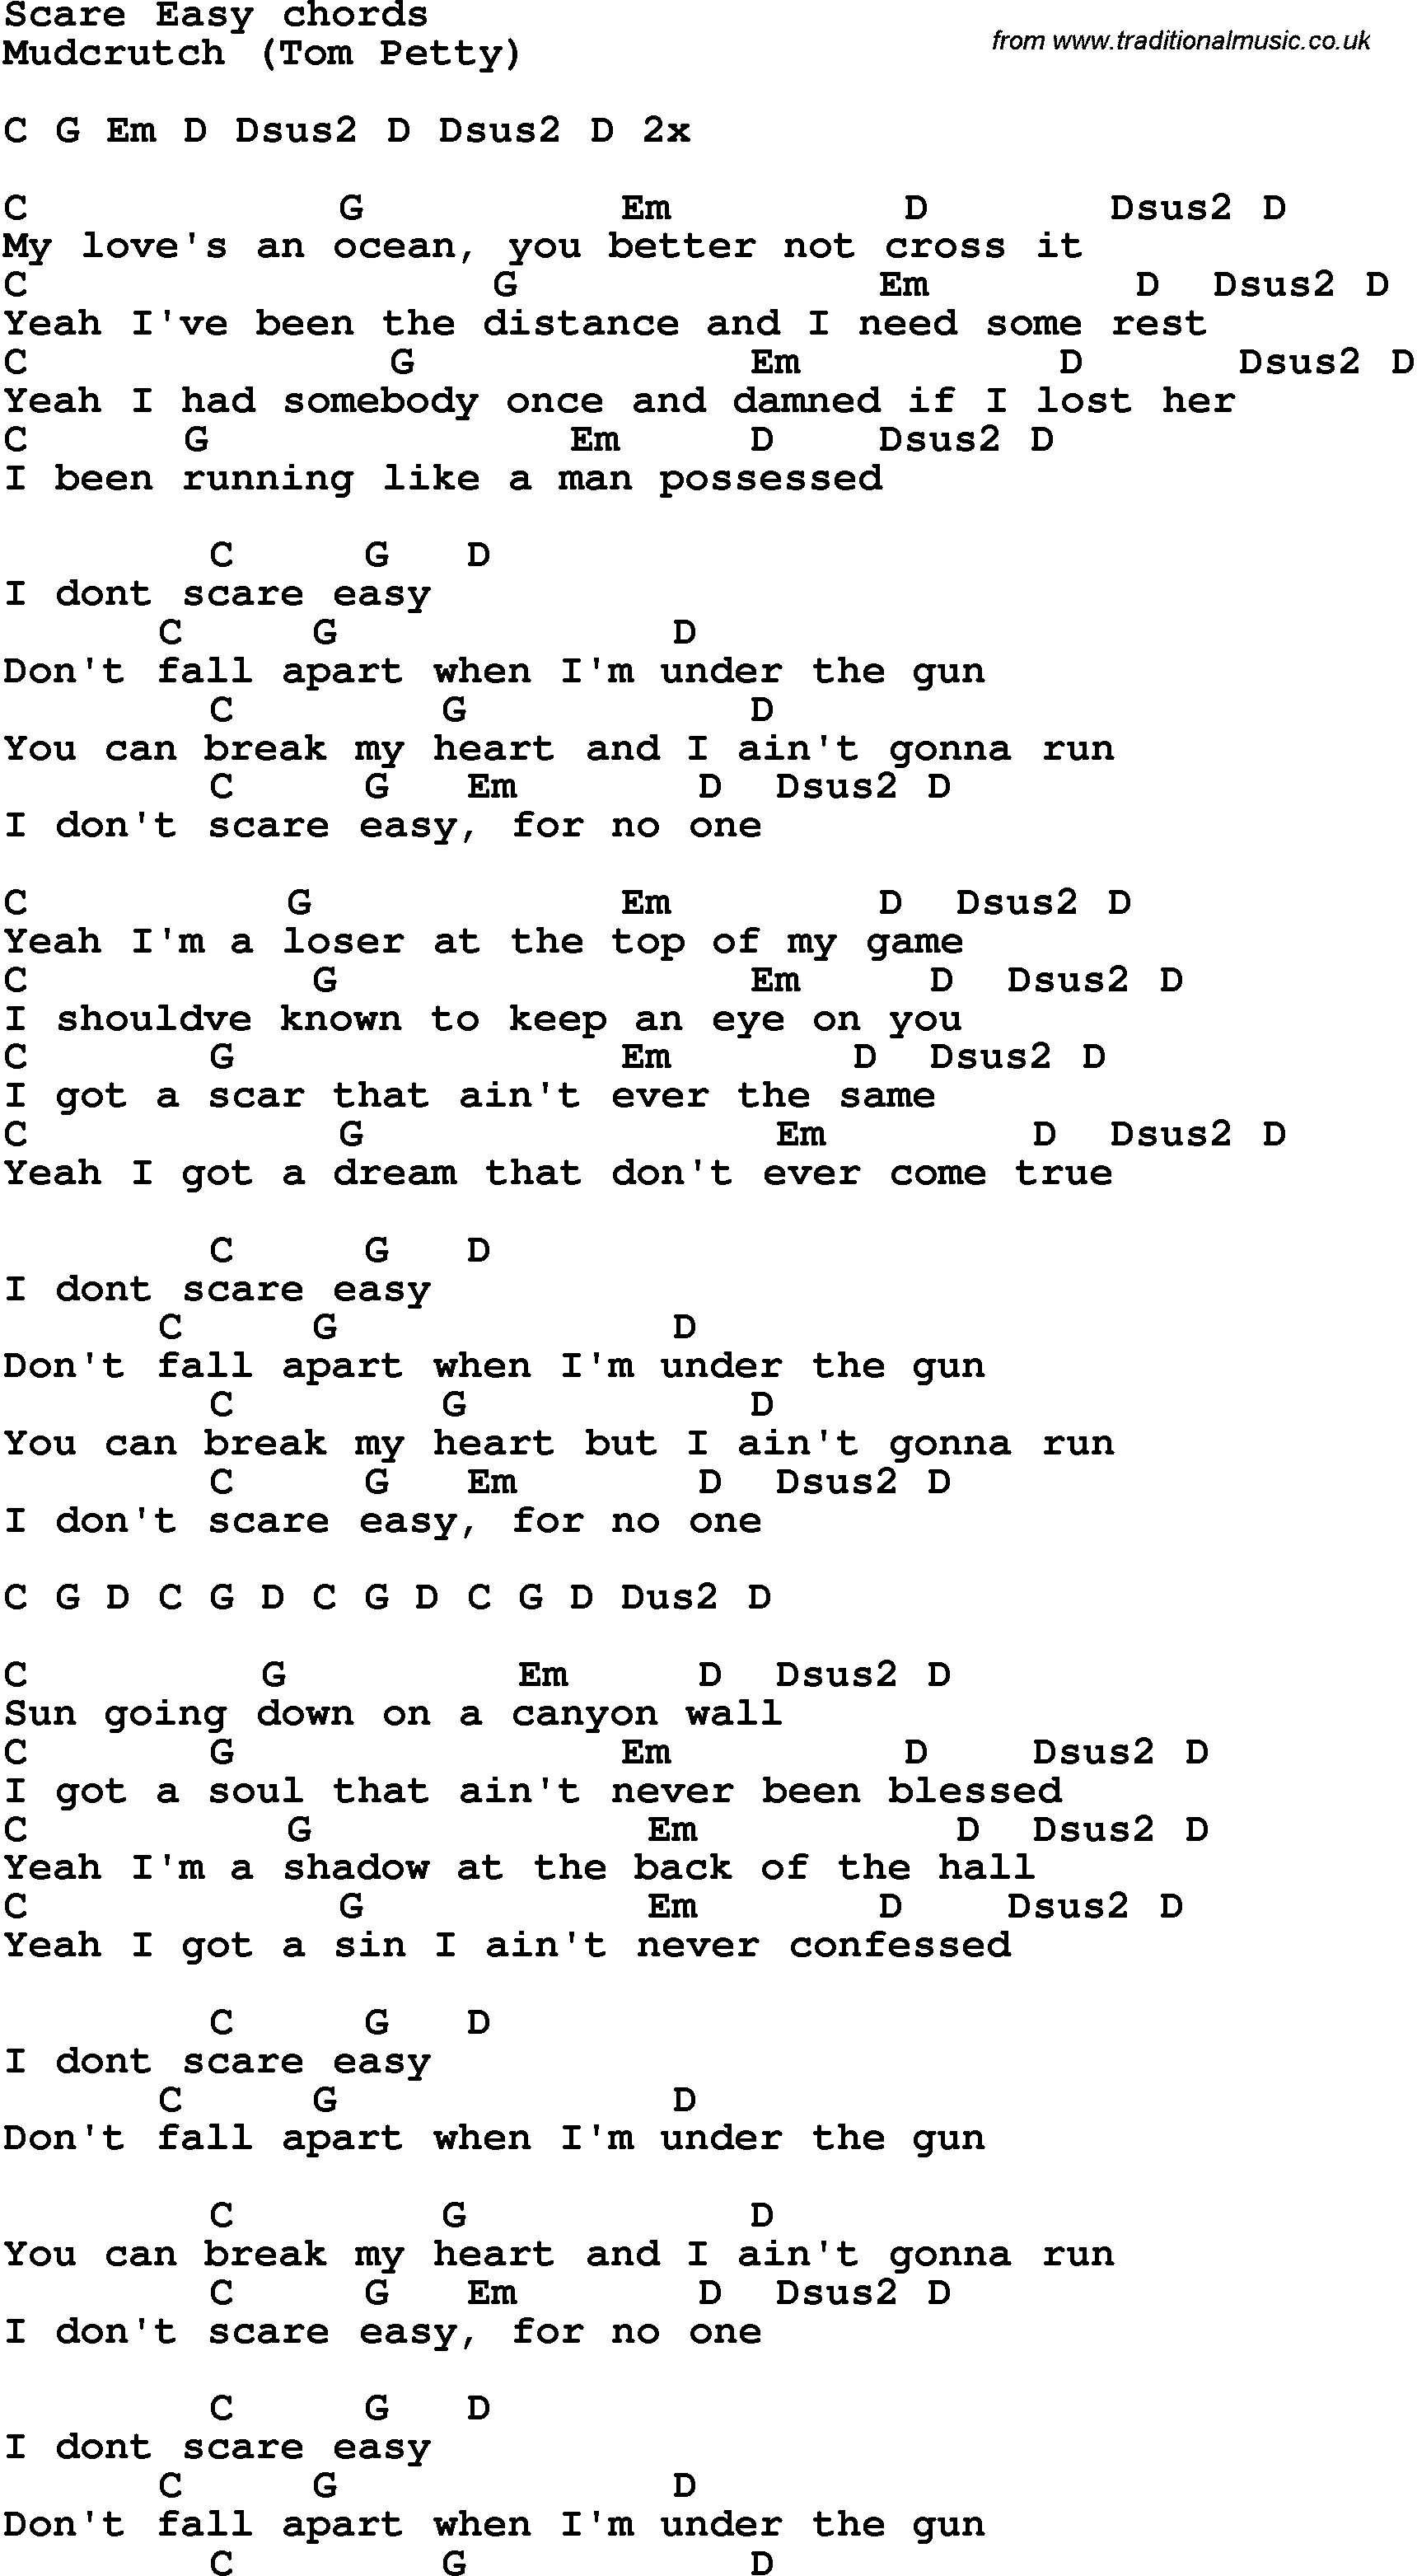 Song Lyrics with guitar chords for Scare Easy